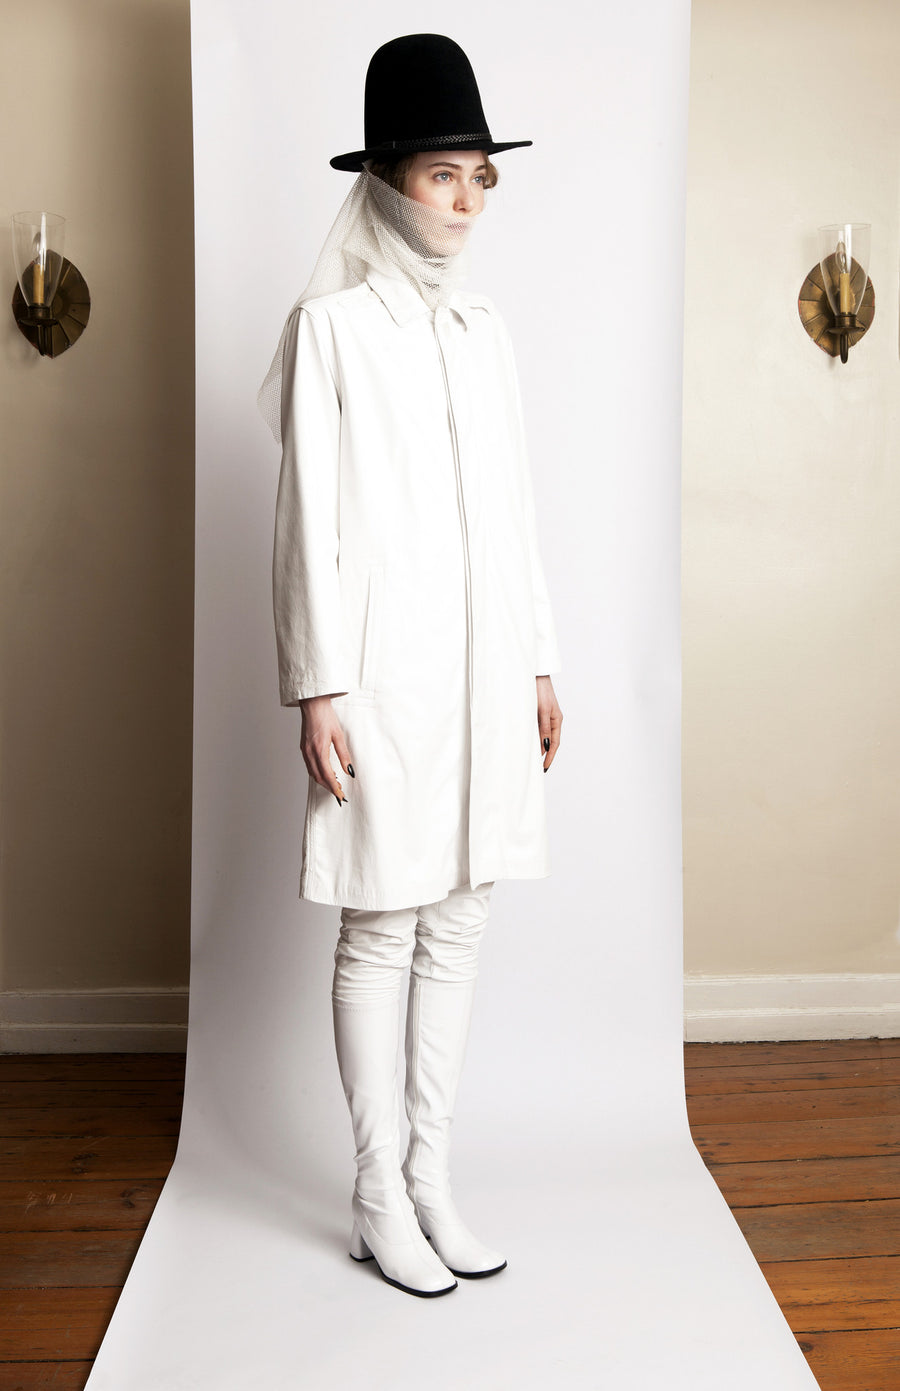 Basia IMG Model Wendy Nichol Clothing Designer Ready to Wear Fashion Runway Show AW13 Witch Lessons Winter White Plonge Leather Coat White Leather Pants Tight Handmade in NYC Custom Tailoring Fitting Size Color Fabric Handmade in NYC Made to Measure custom White witch El Topo felt hat 